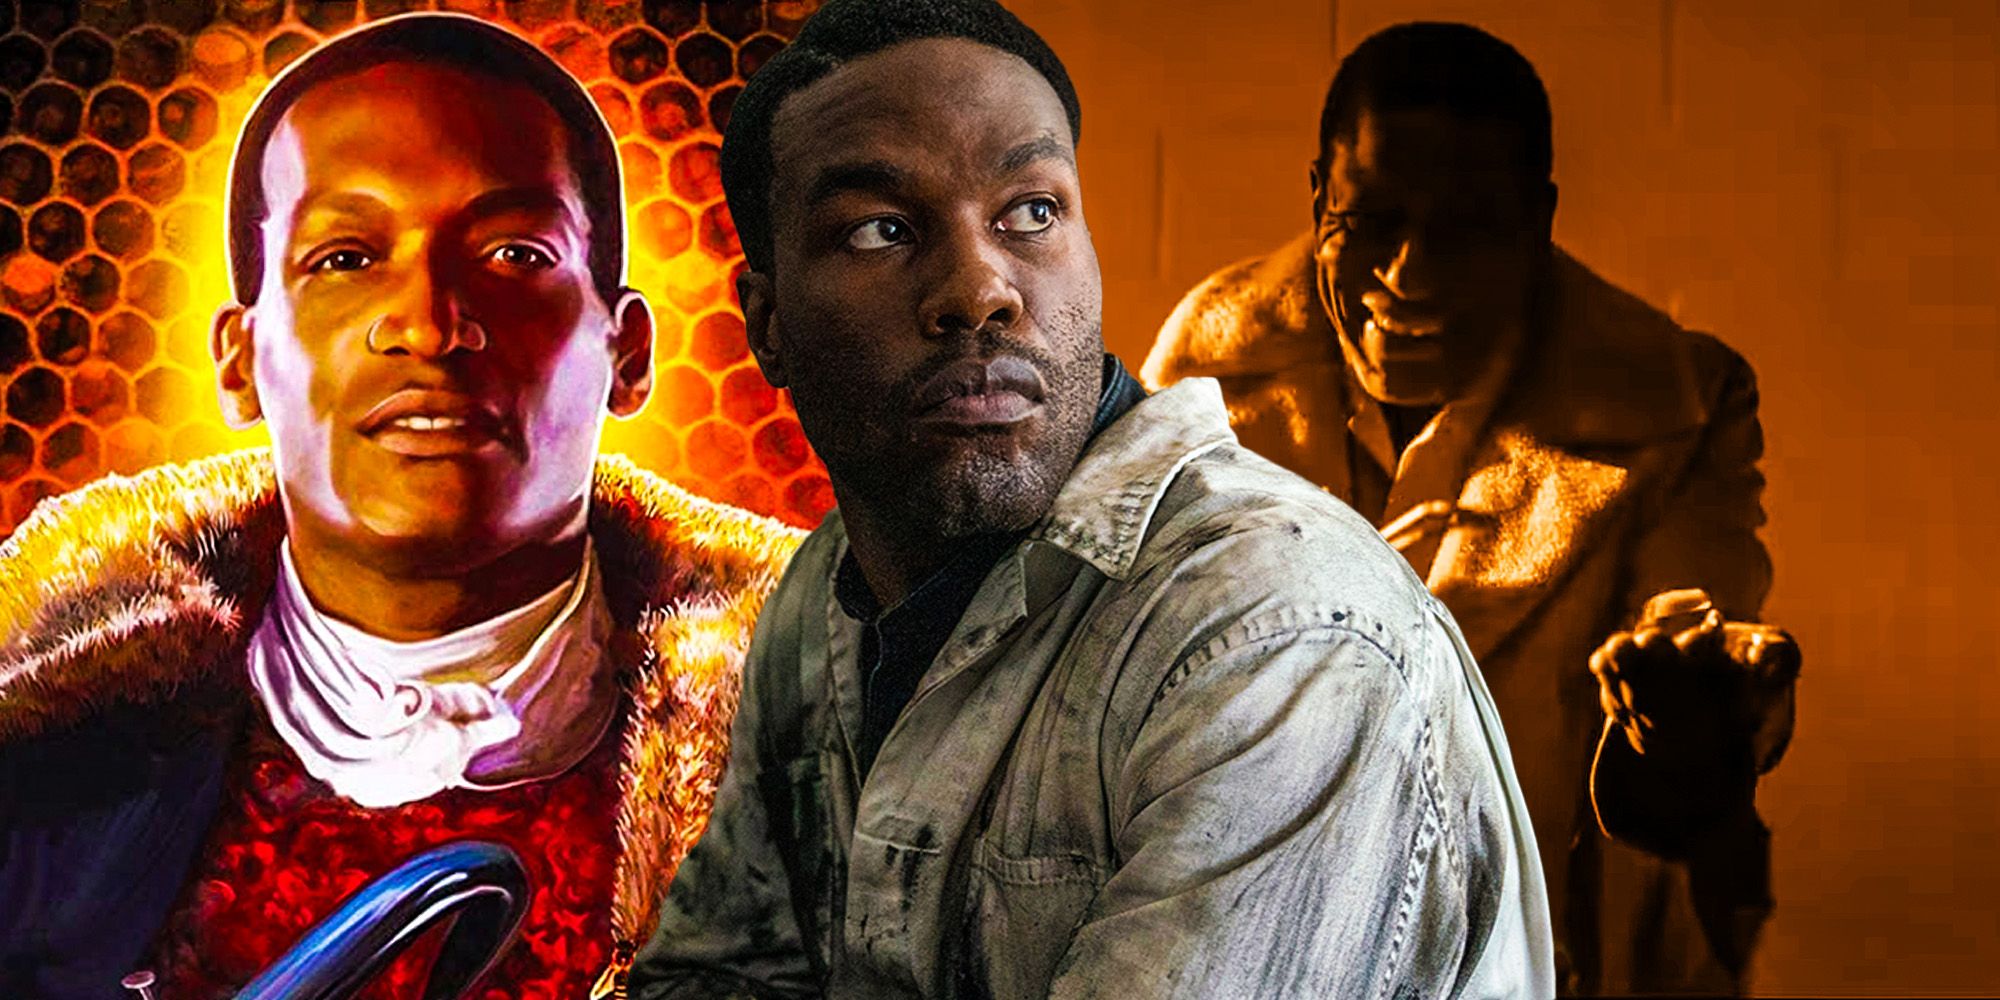 How Much Did Candyman Cost To Make (Can It Be A Box Office Success)?